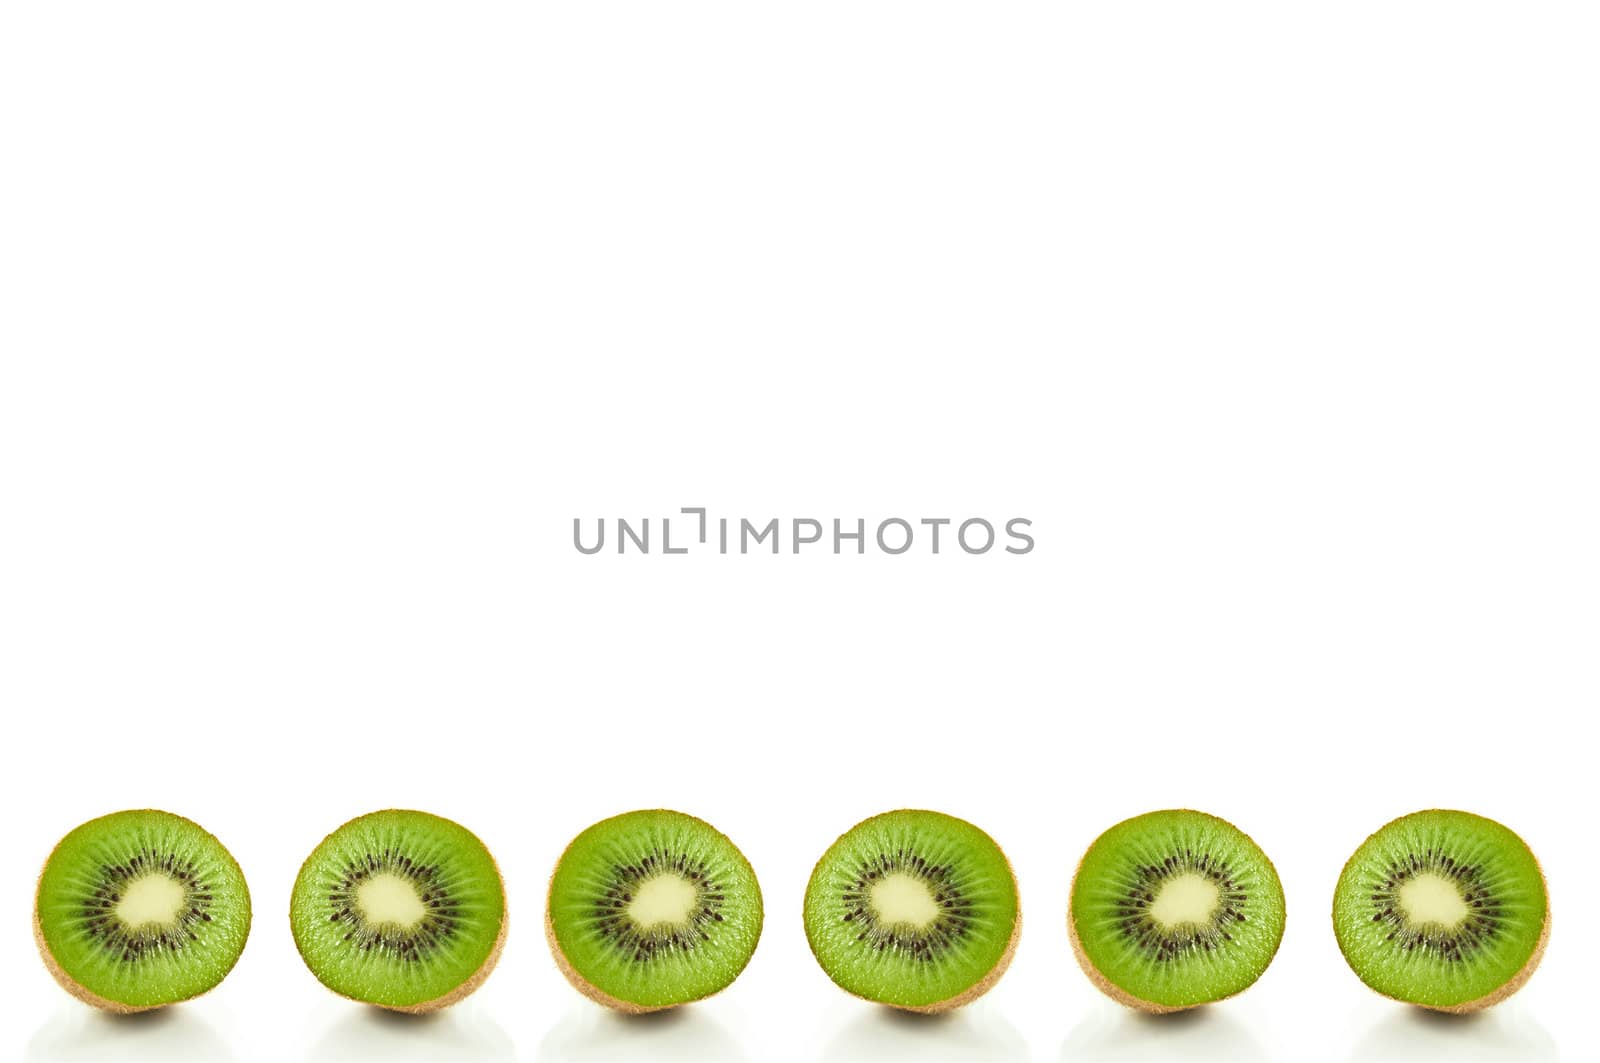 Six small kiwi fruit halves arranged in a horizontal line along the bottom of the image and over white.